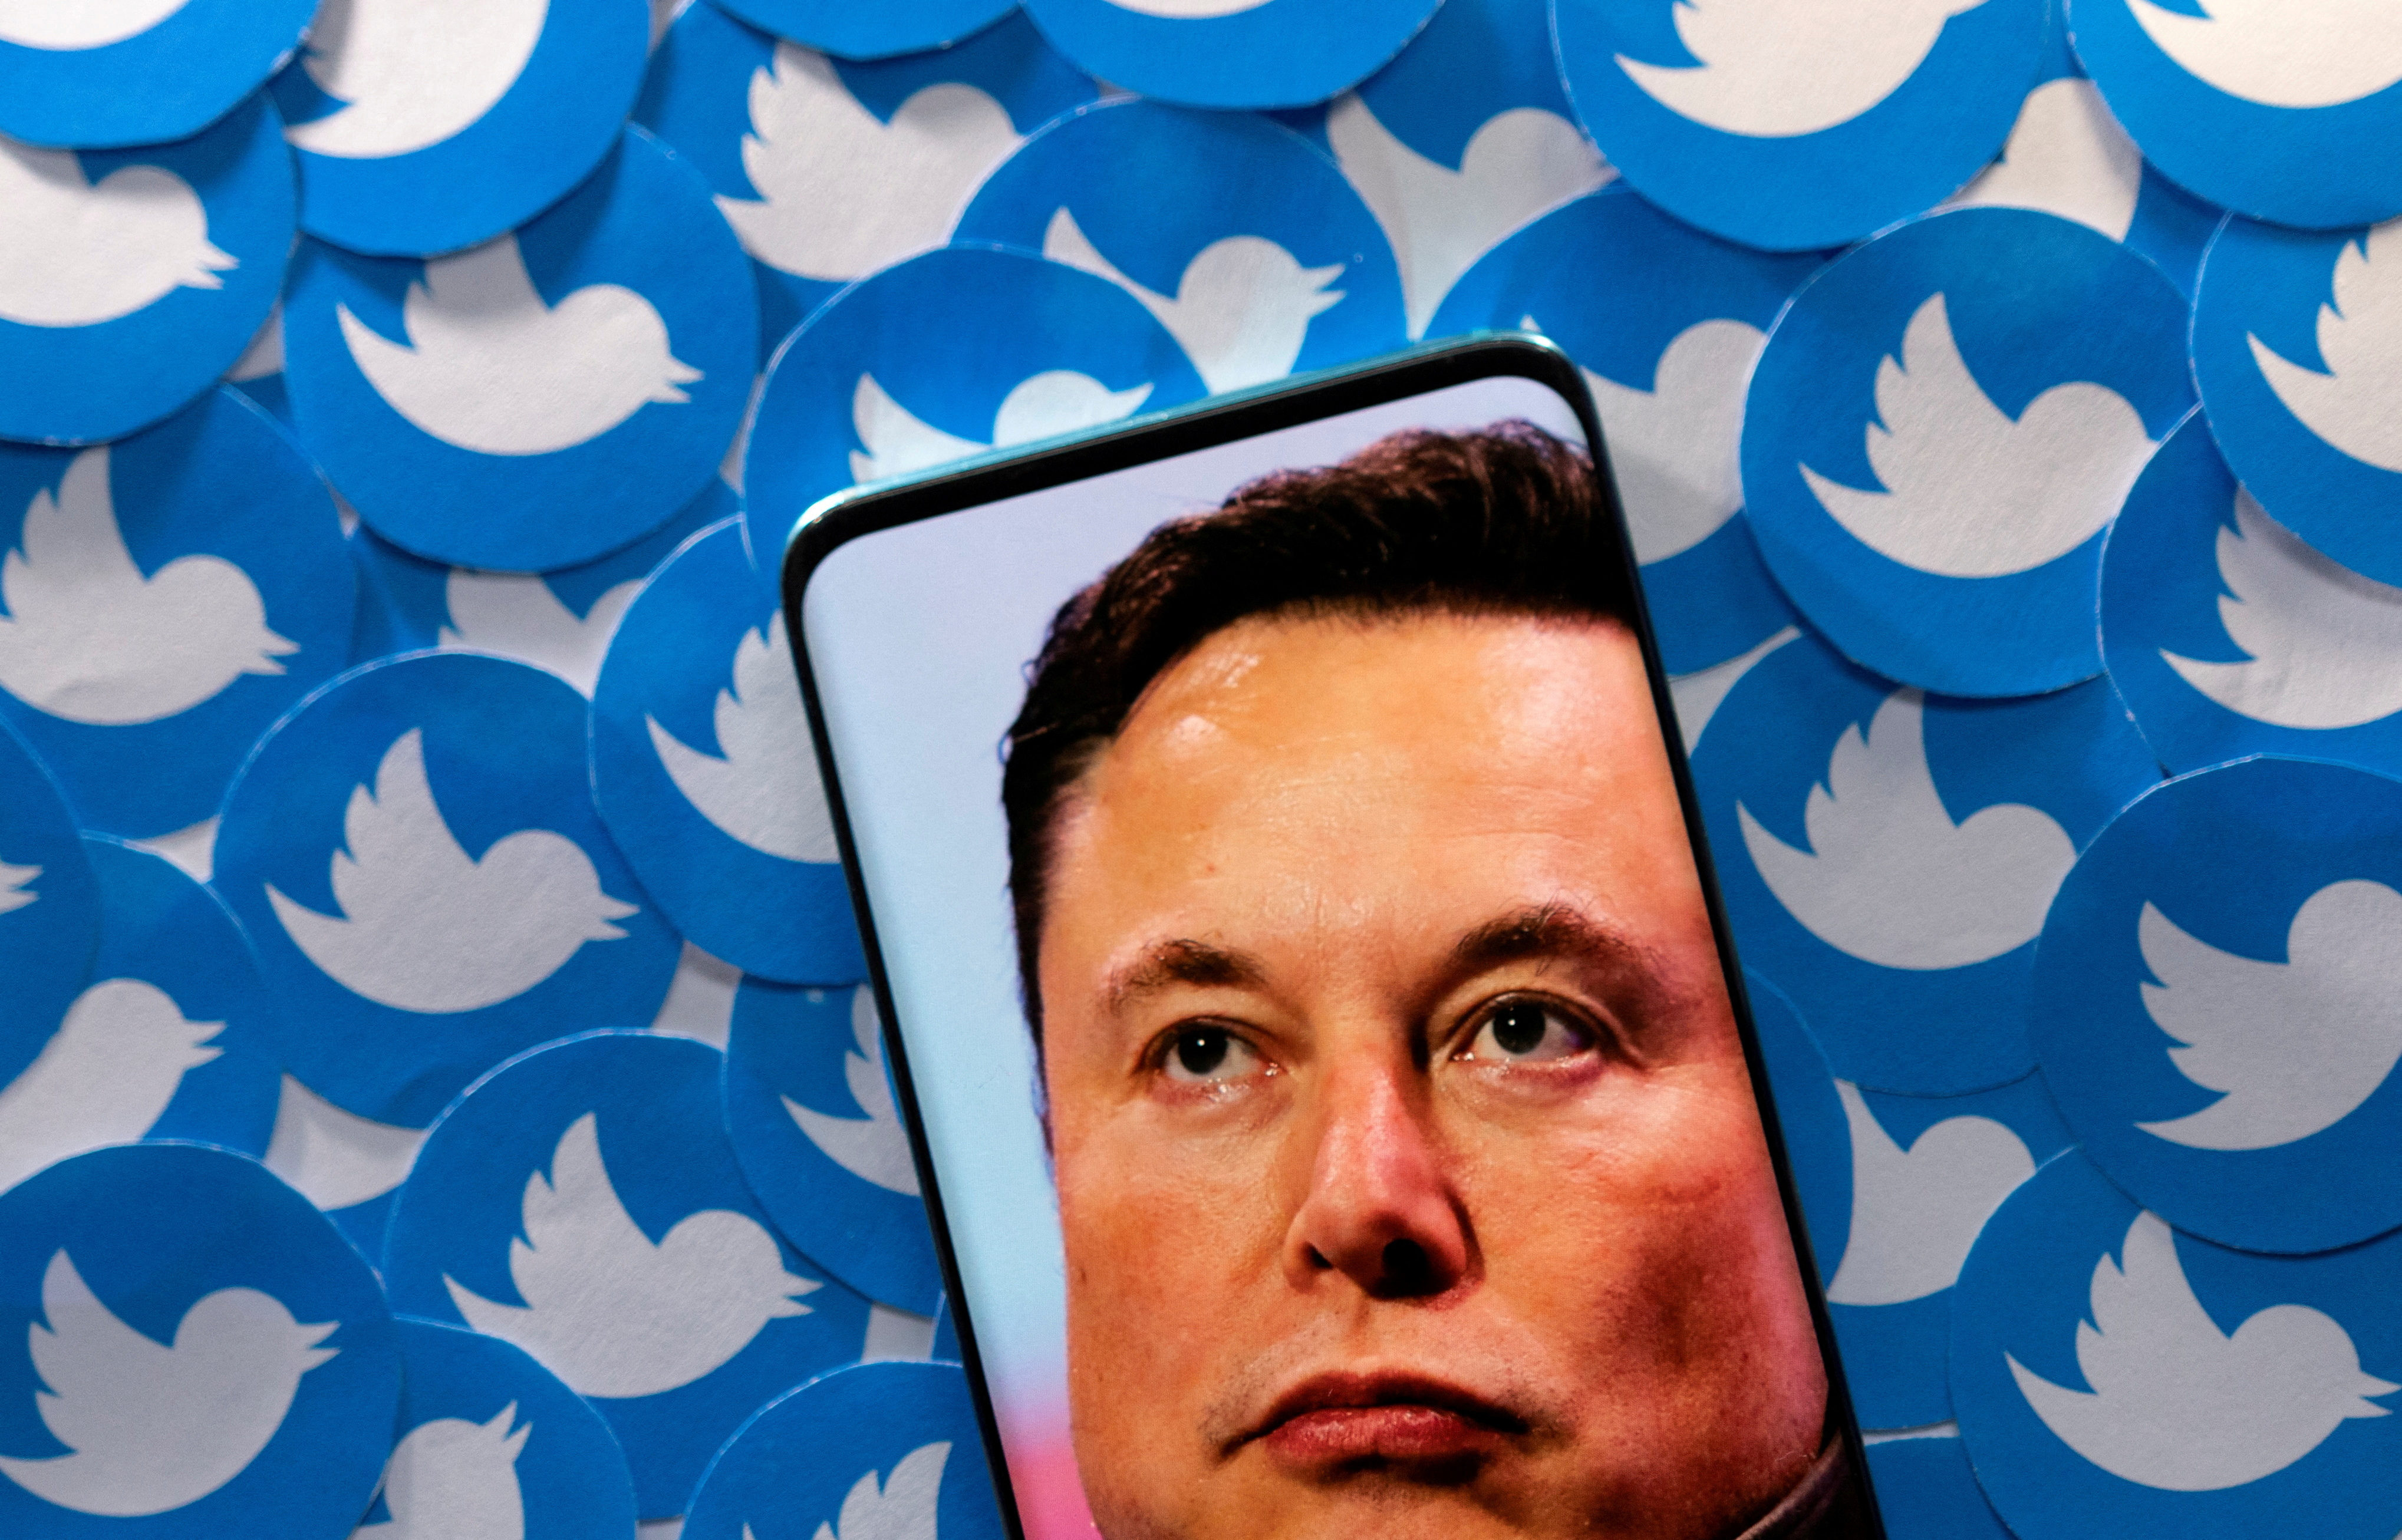  Elon Musk image on smartphone and printed Twitter logos